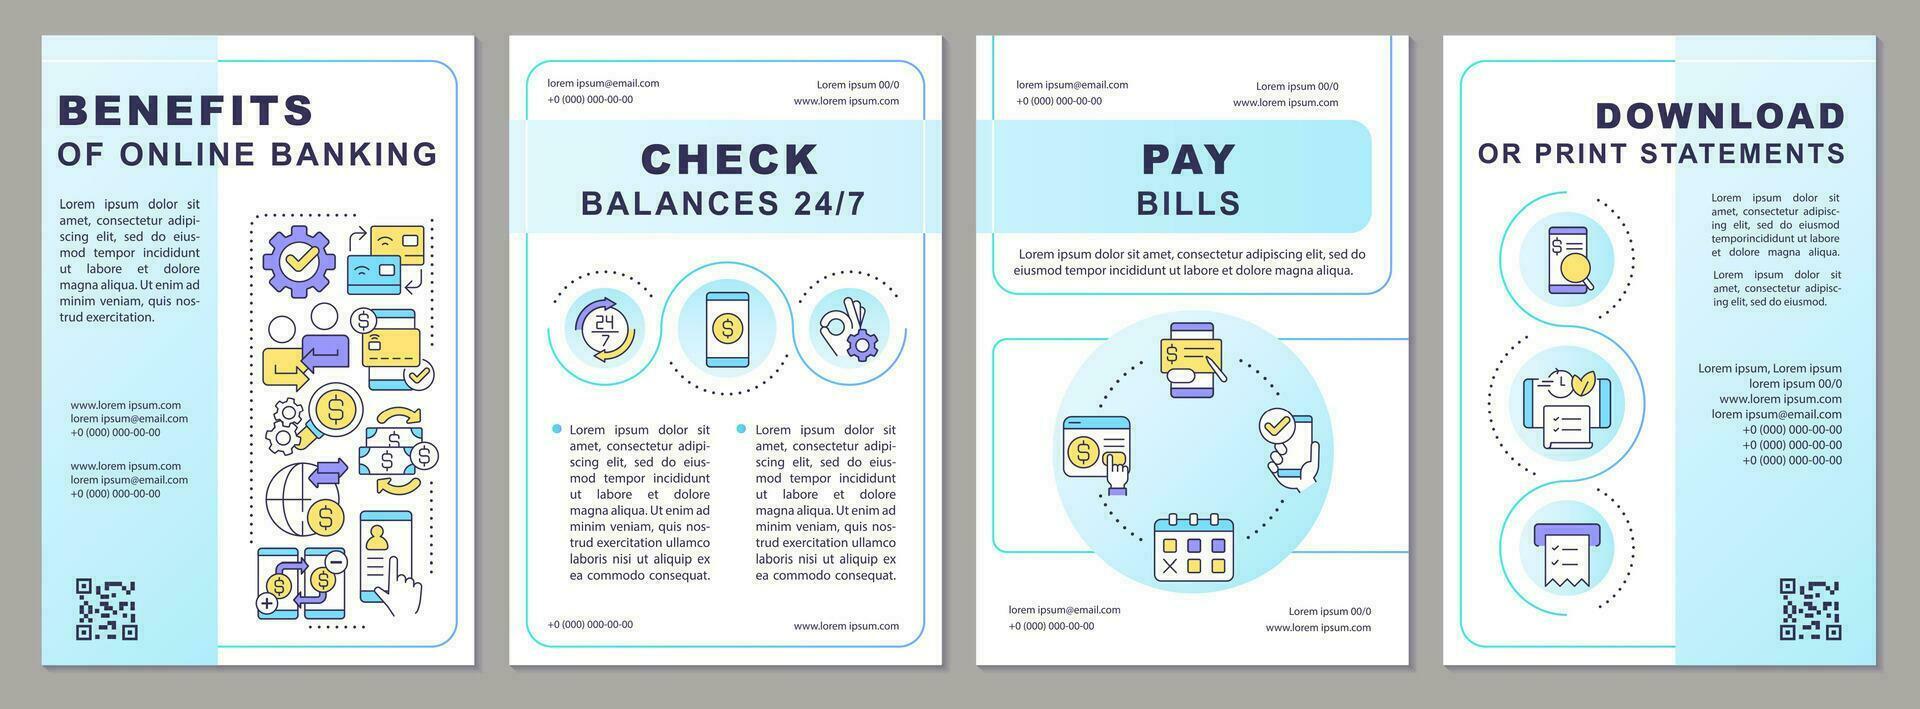 E banking advantages brochure template. Online money transfers. Leaflet design with linear icons. Editable 4 vector layouts for presentation, annual reports